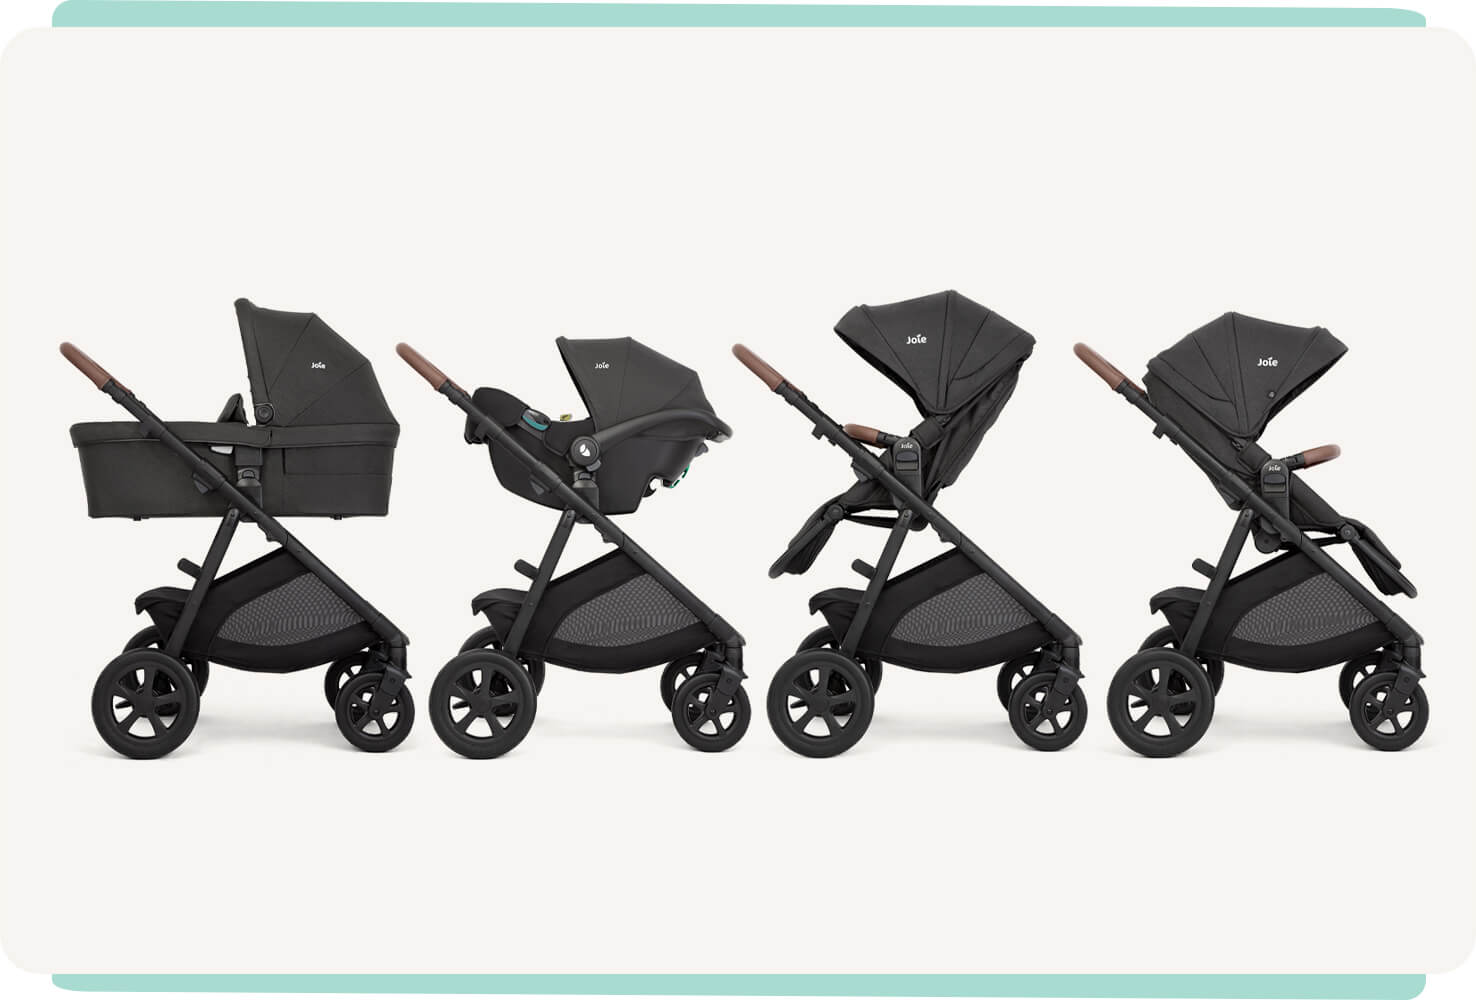 Joie alore stroller shown in all 4 modes 
